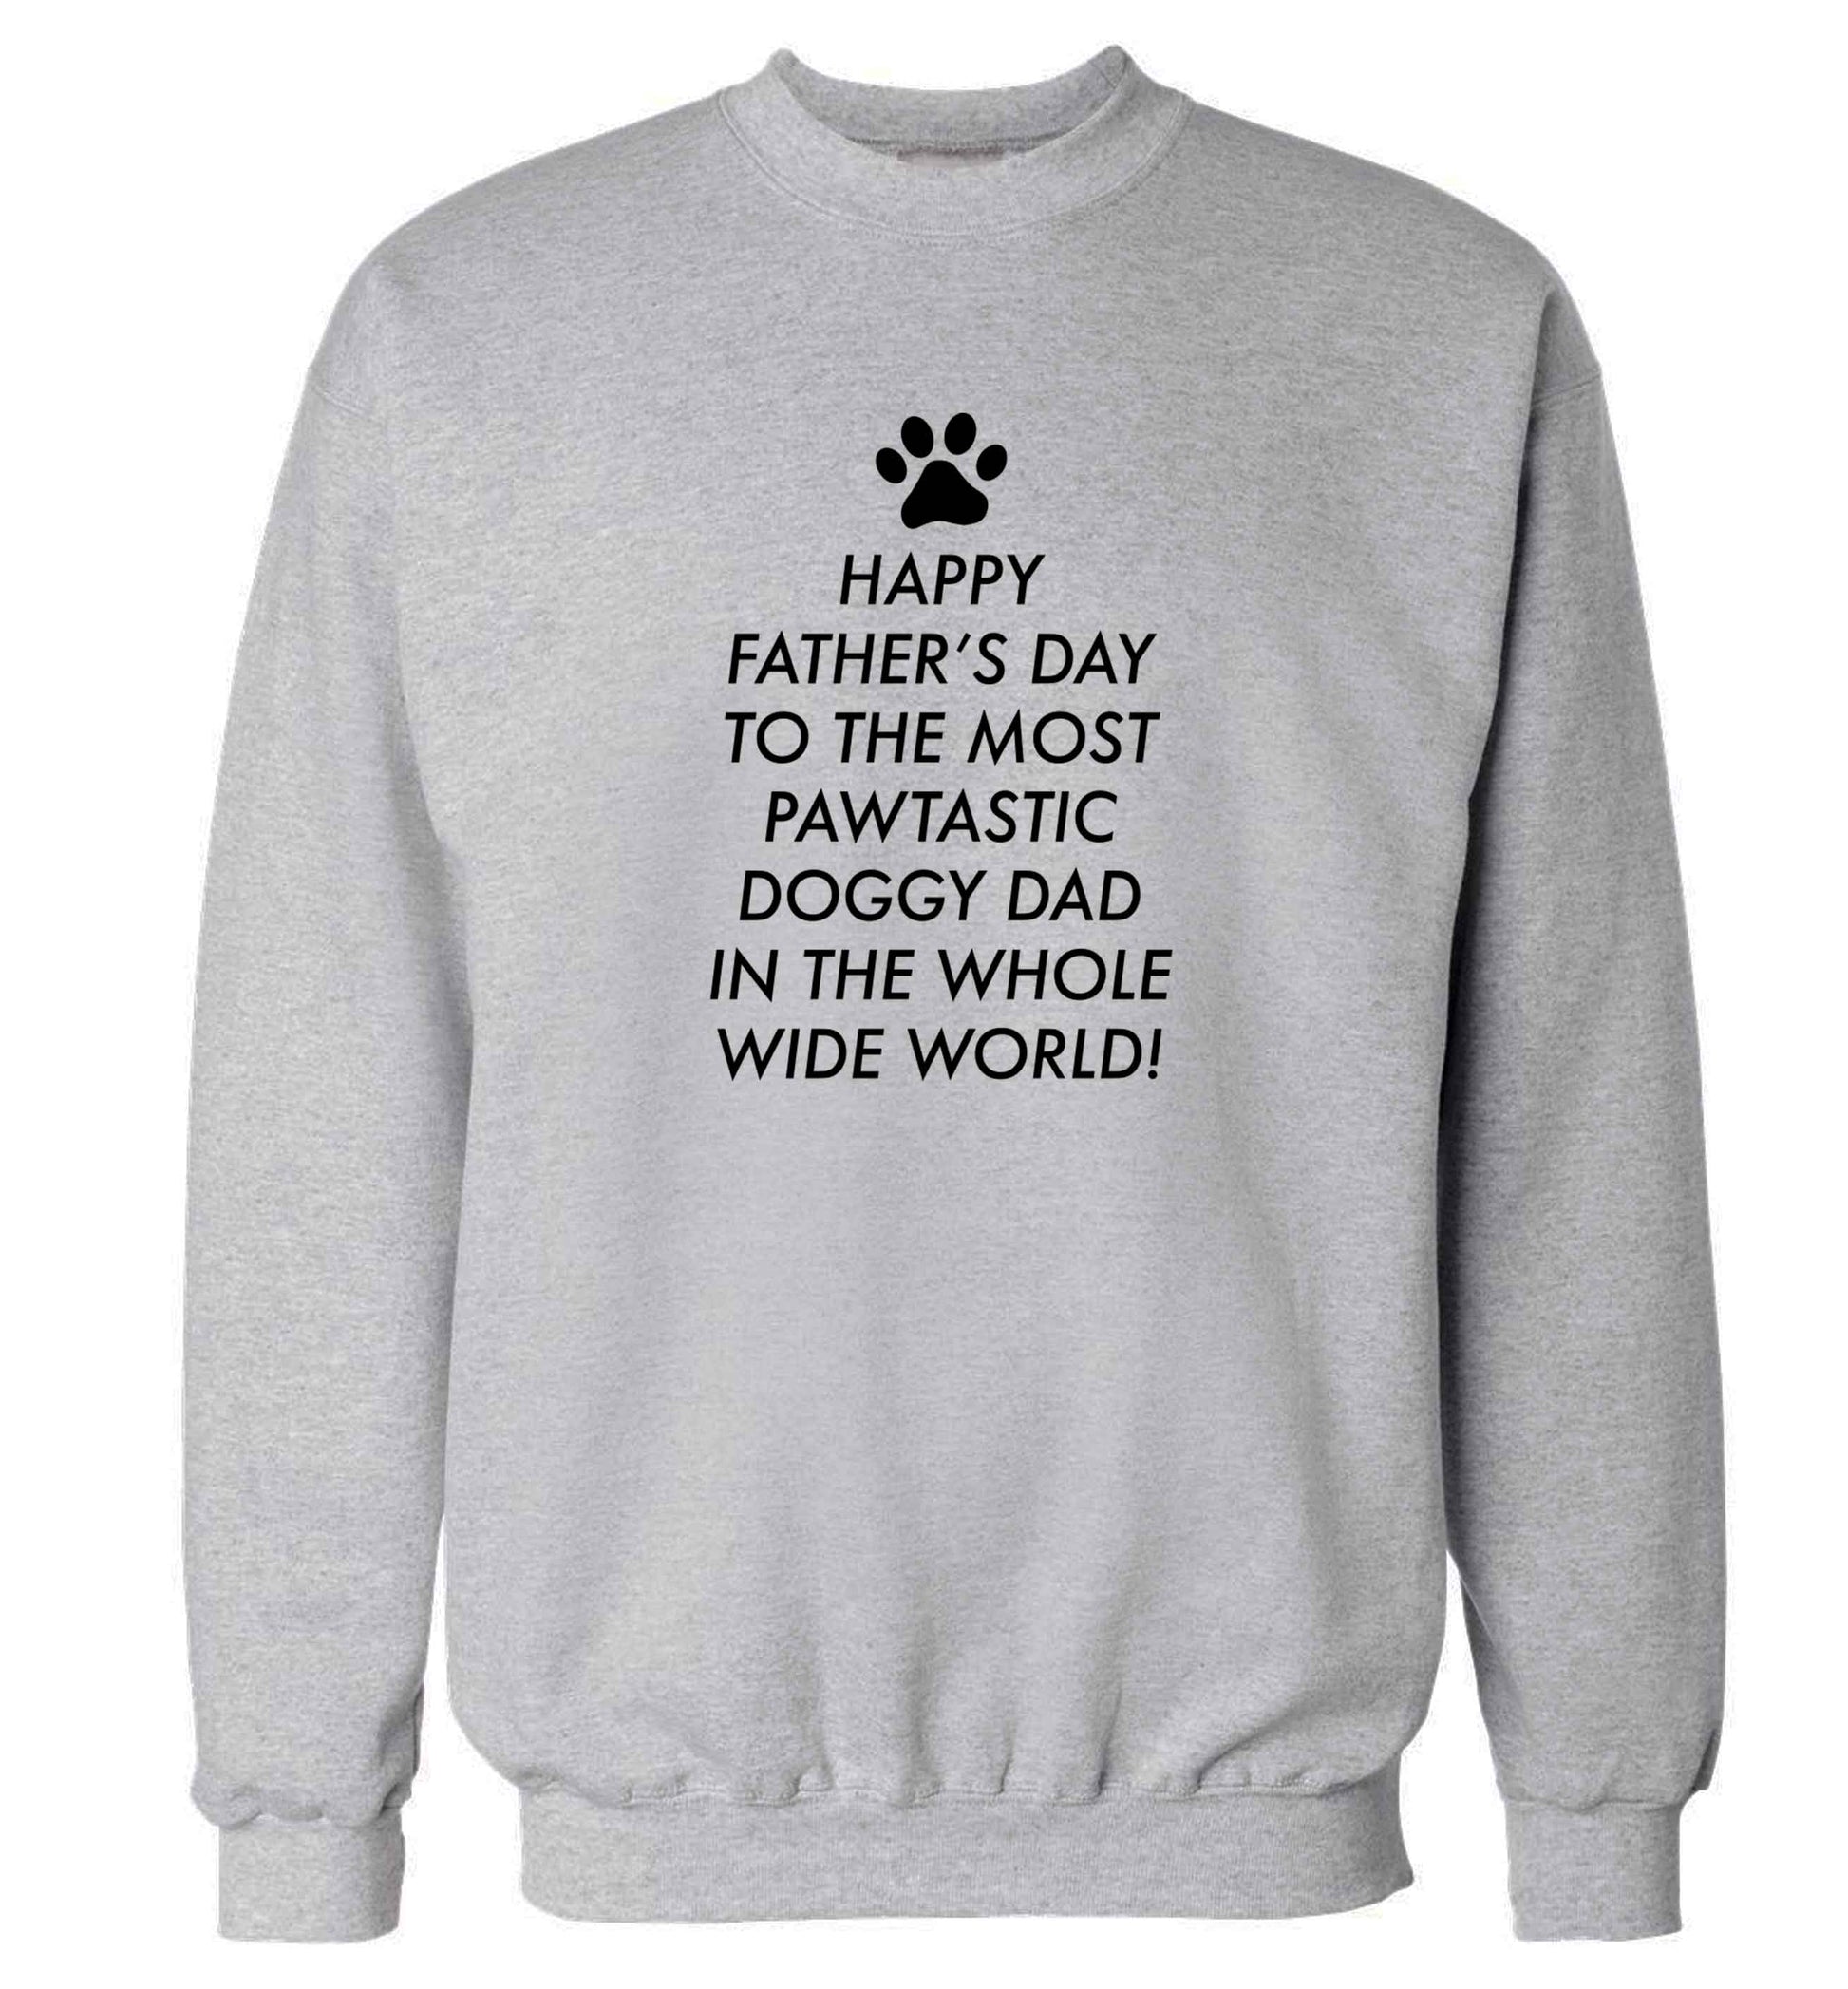 Happy Father's day to the most pawtastic doggy dad in the whole wide world!adult's unisex grey sweater 2XL